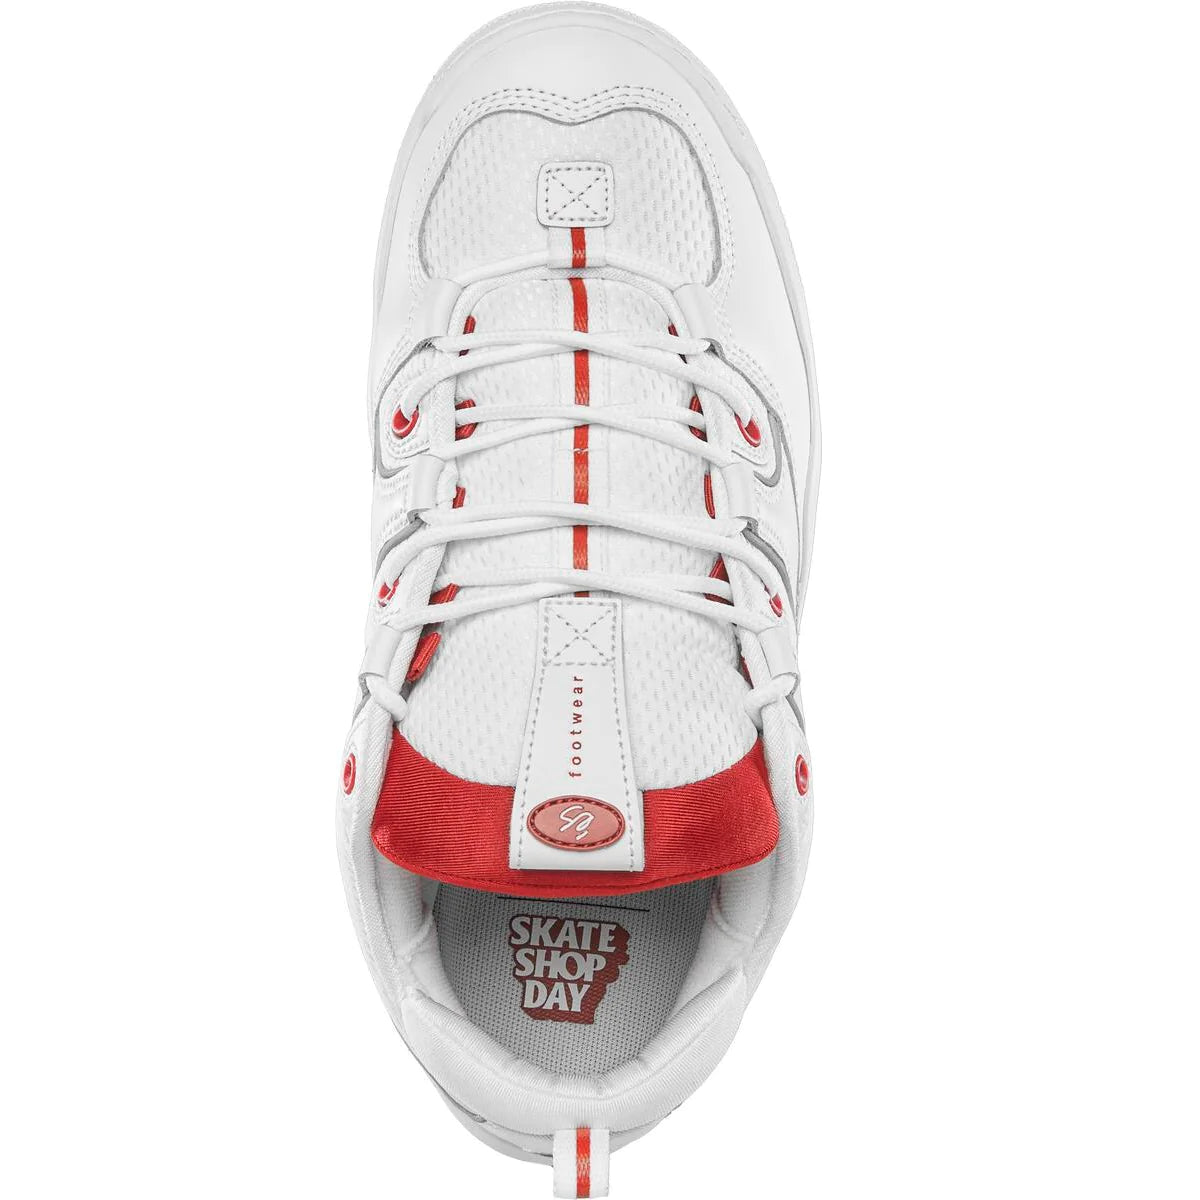 eS Two Nine 8 298 Skate Shop Day Limited Edition - White / Red